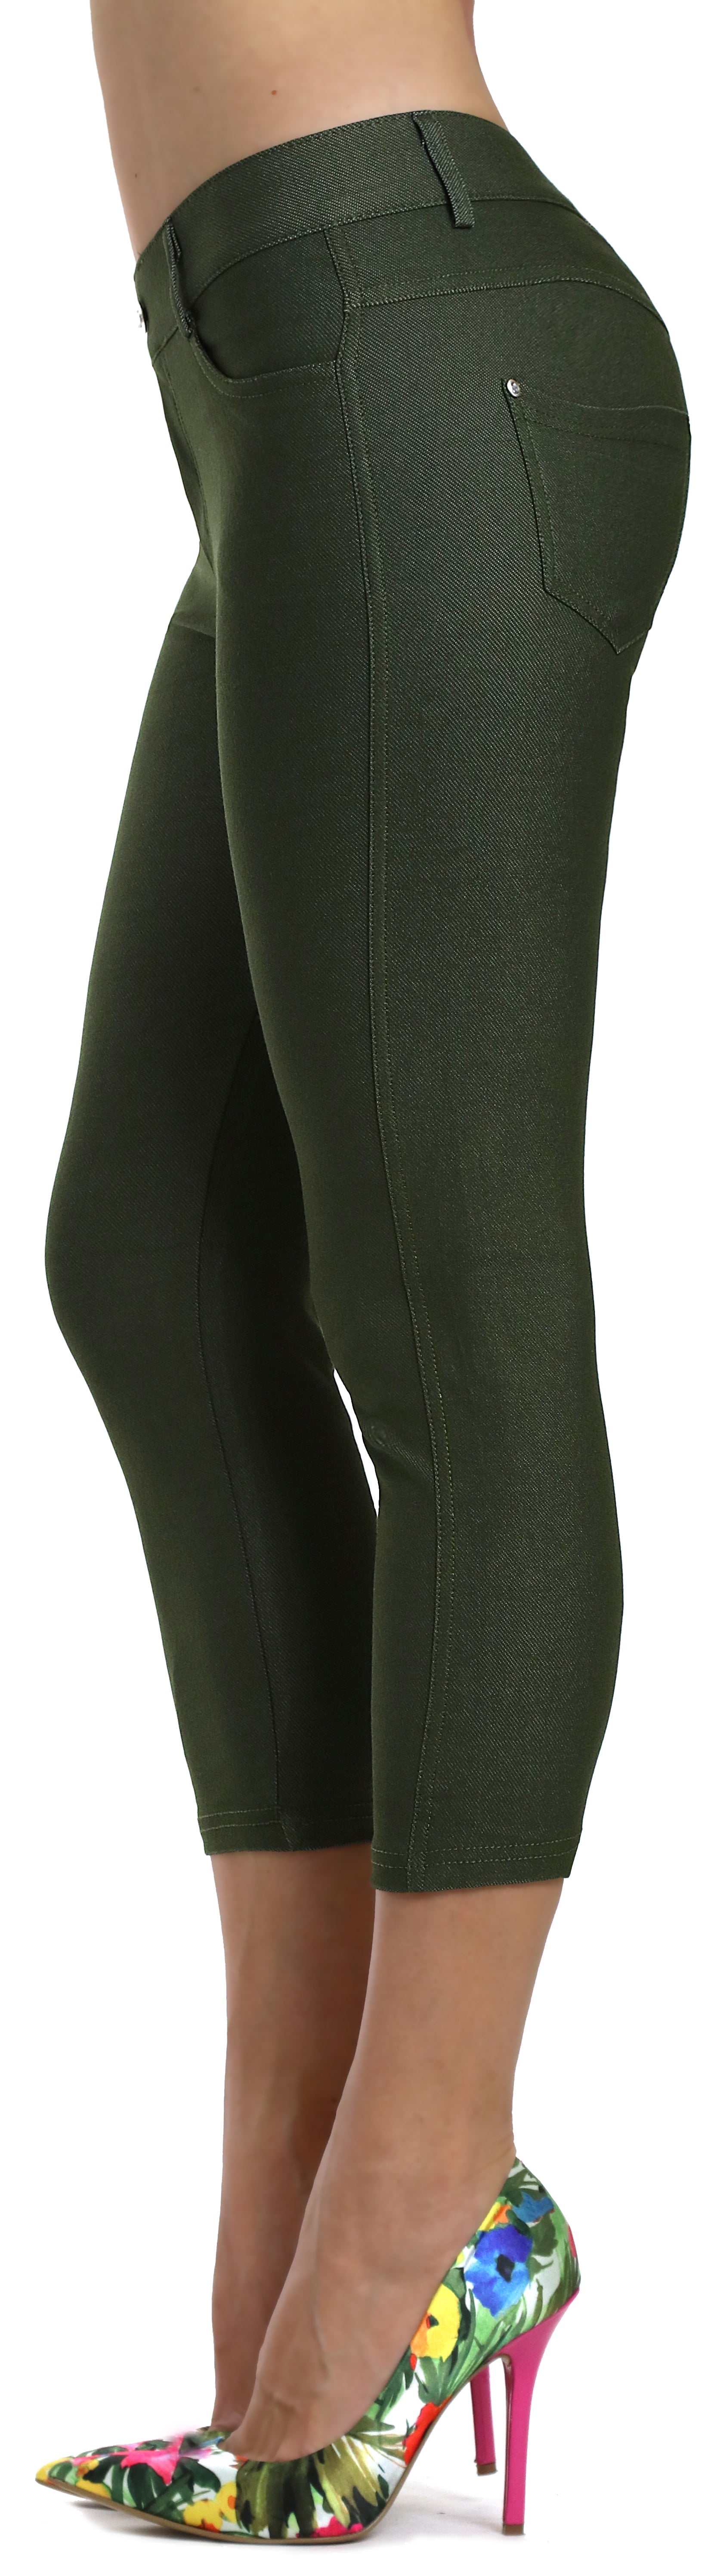 Leggings with Pocket – Prolific Health Corp